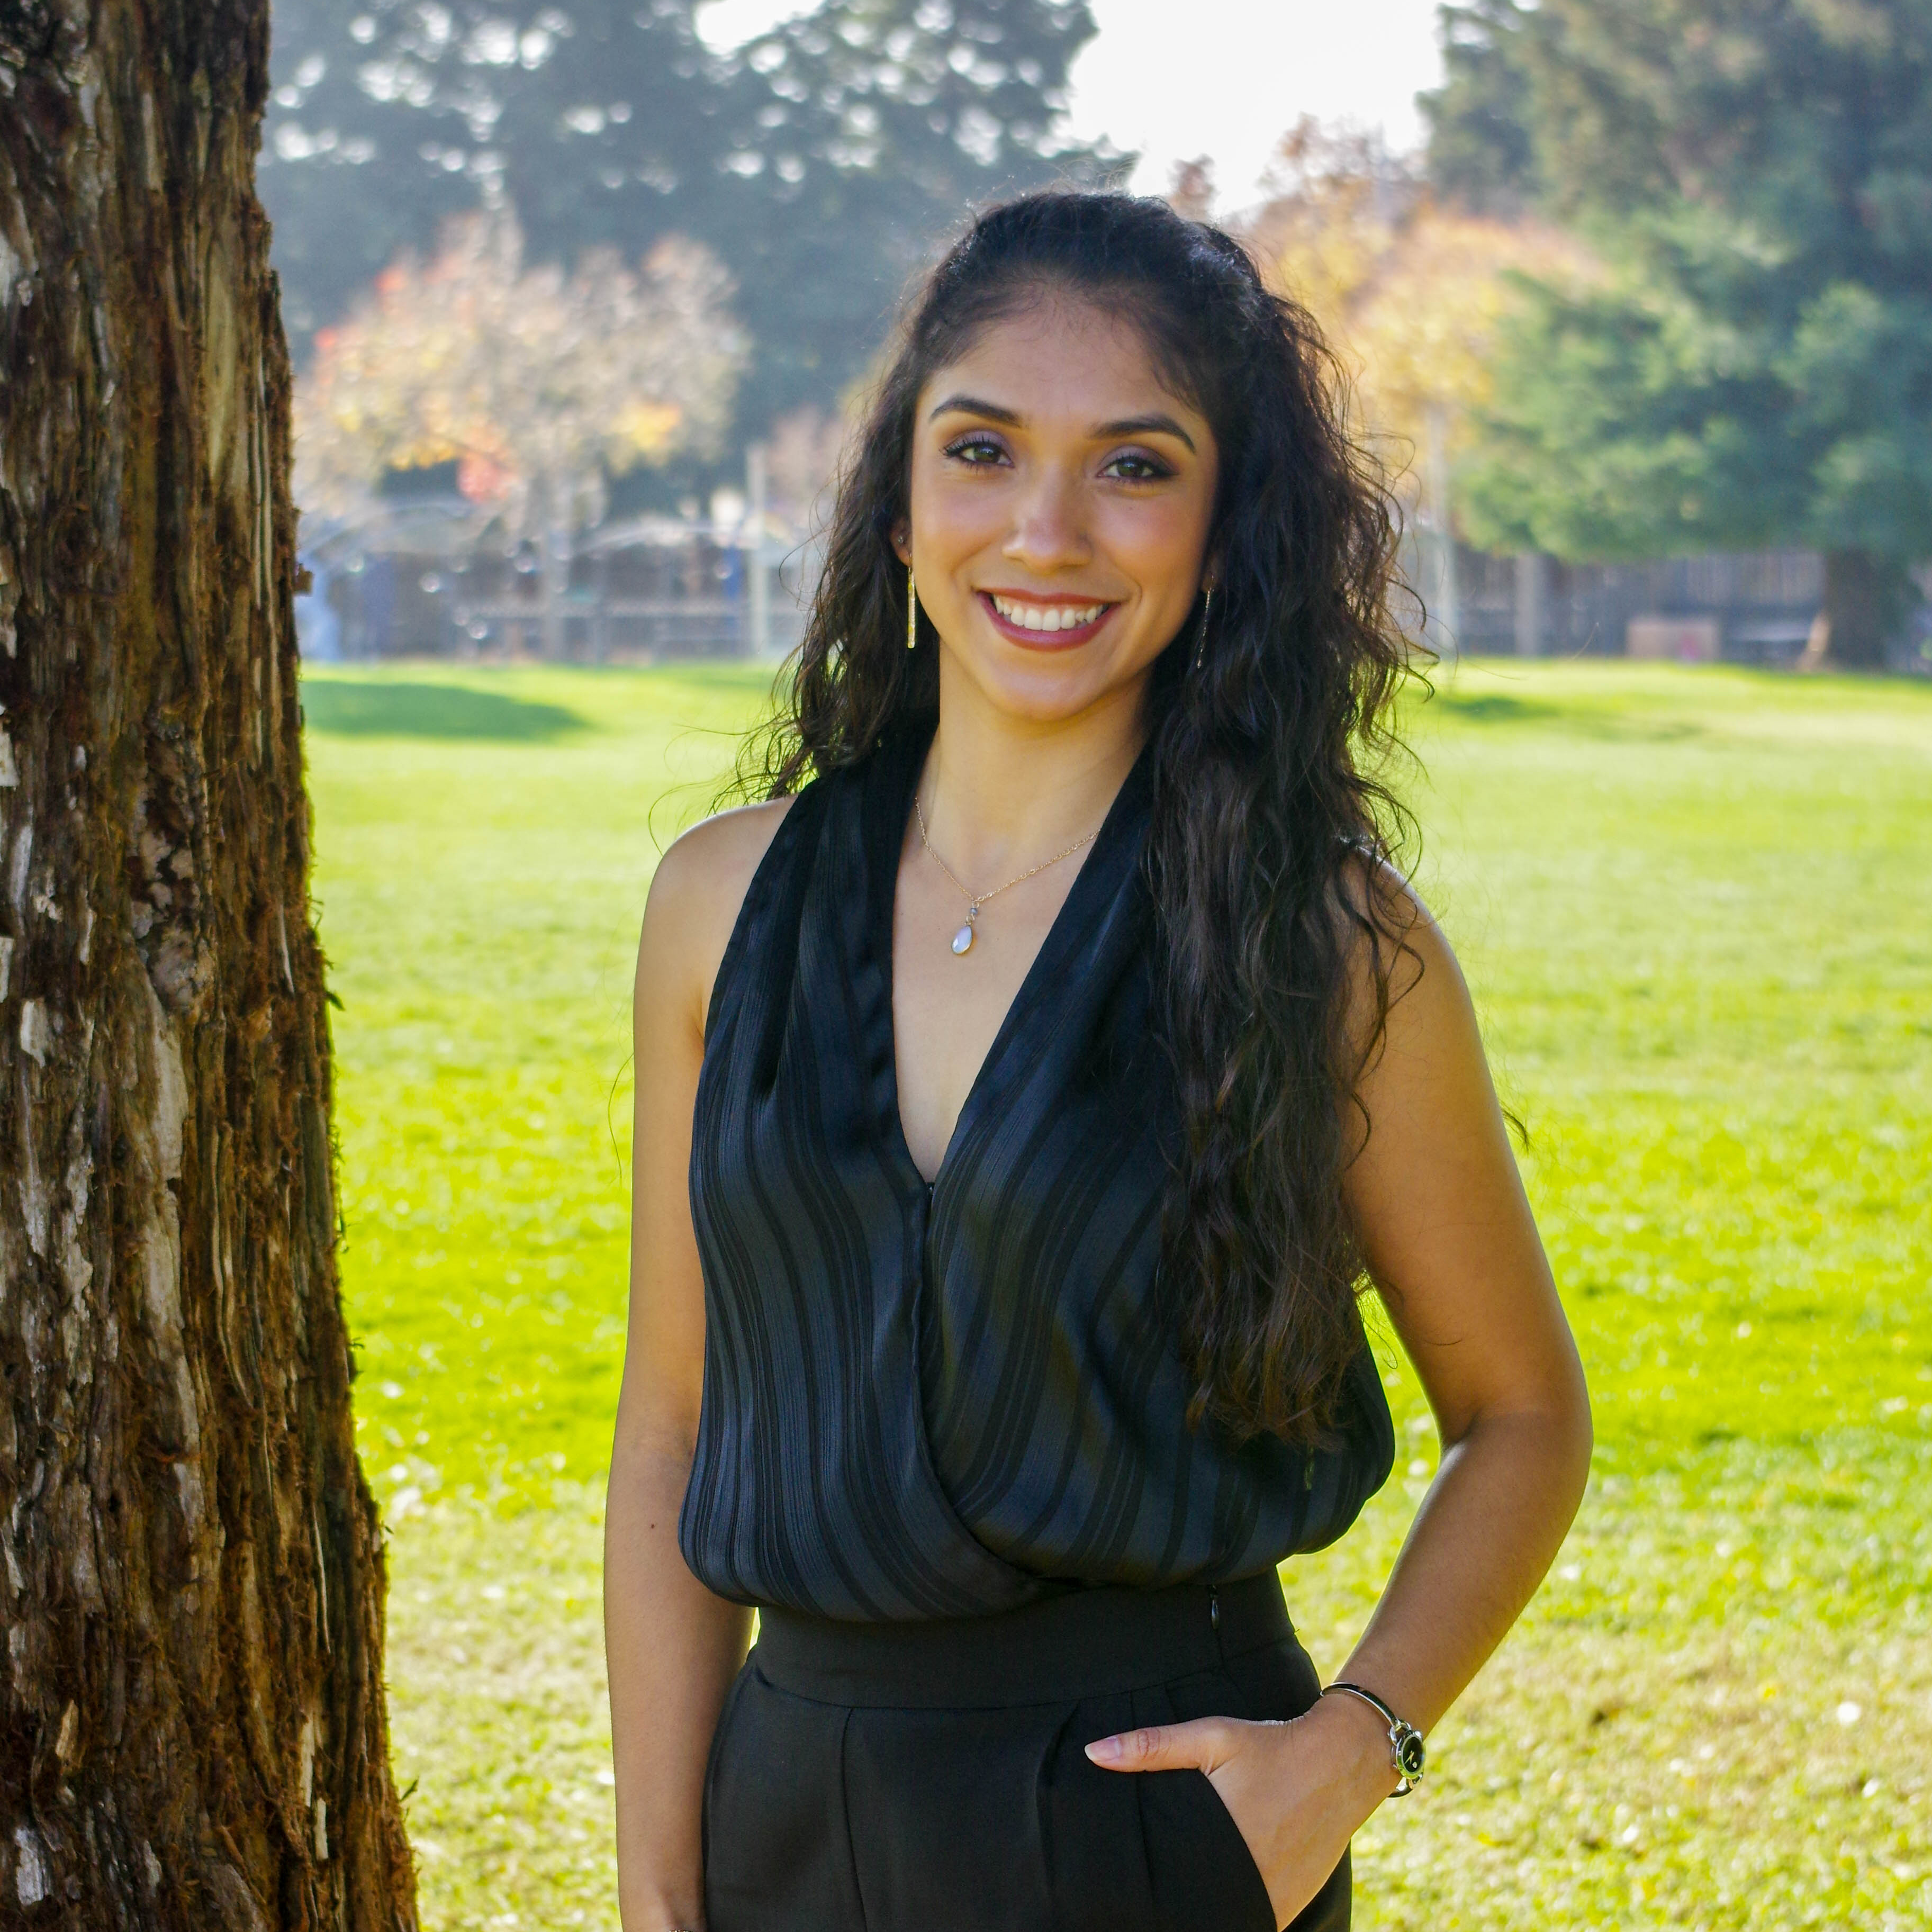 Color photo of Mayra smiling, standing next to a tree on a sunny day, her left hand in her pants pocket.